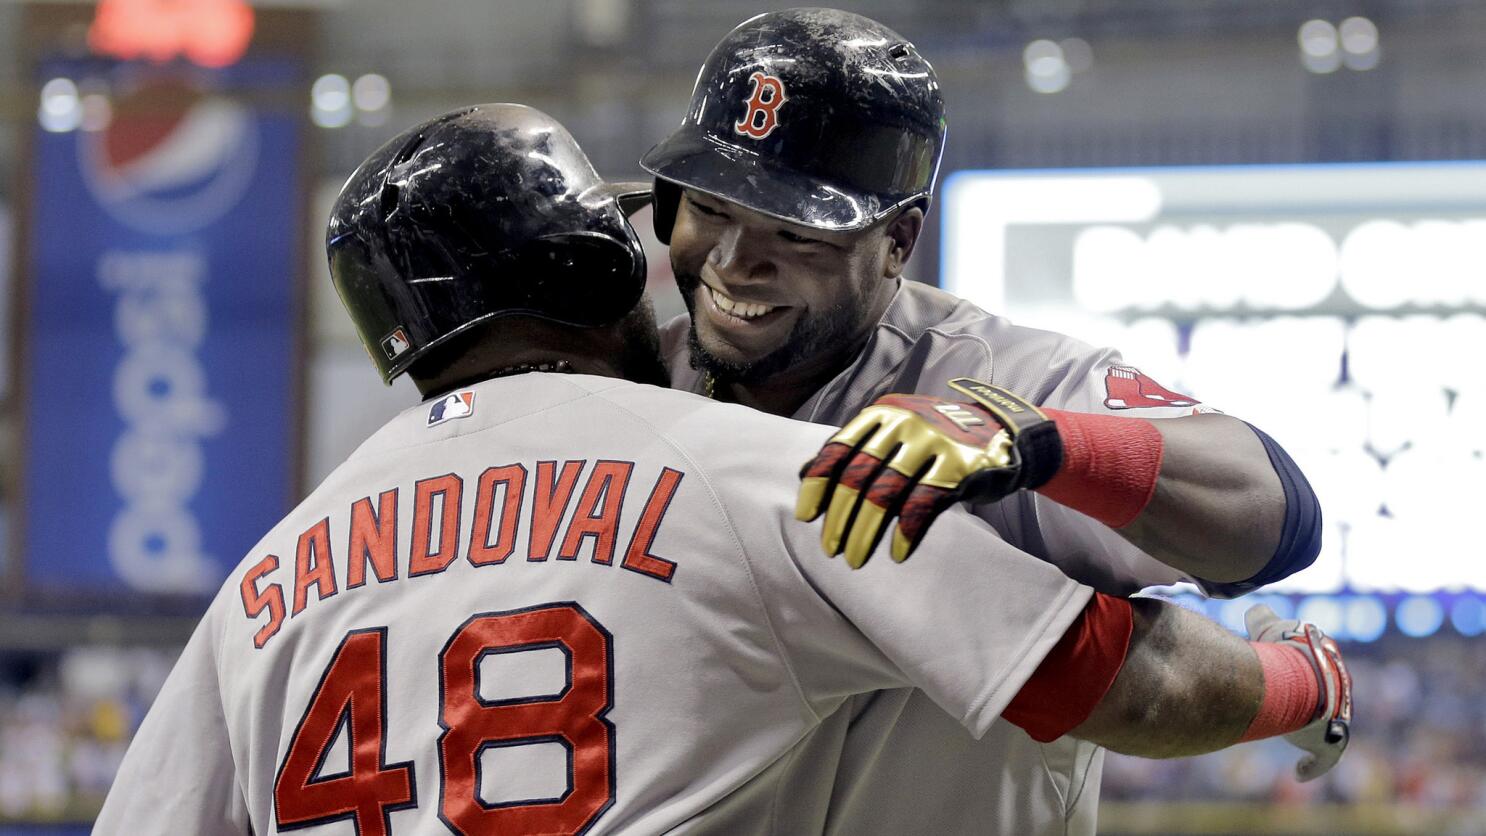 David Ortiz is done with the Home Run Derby - NBC Sports